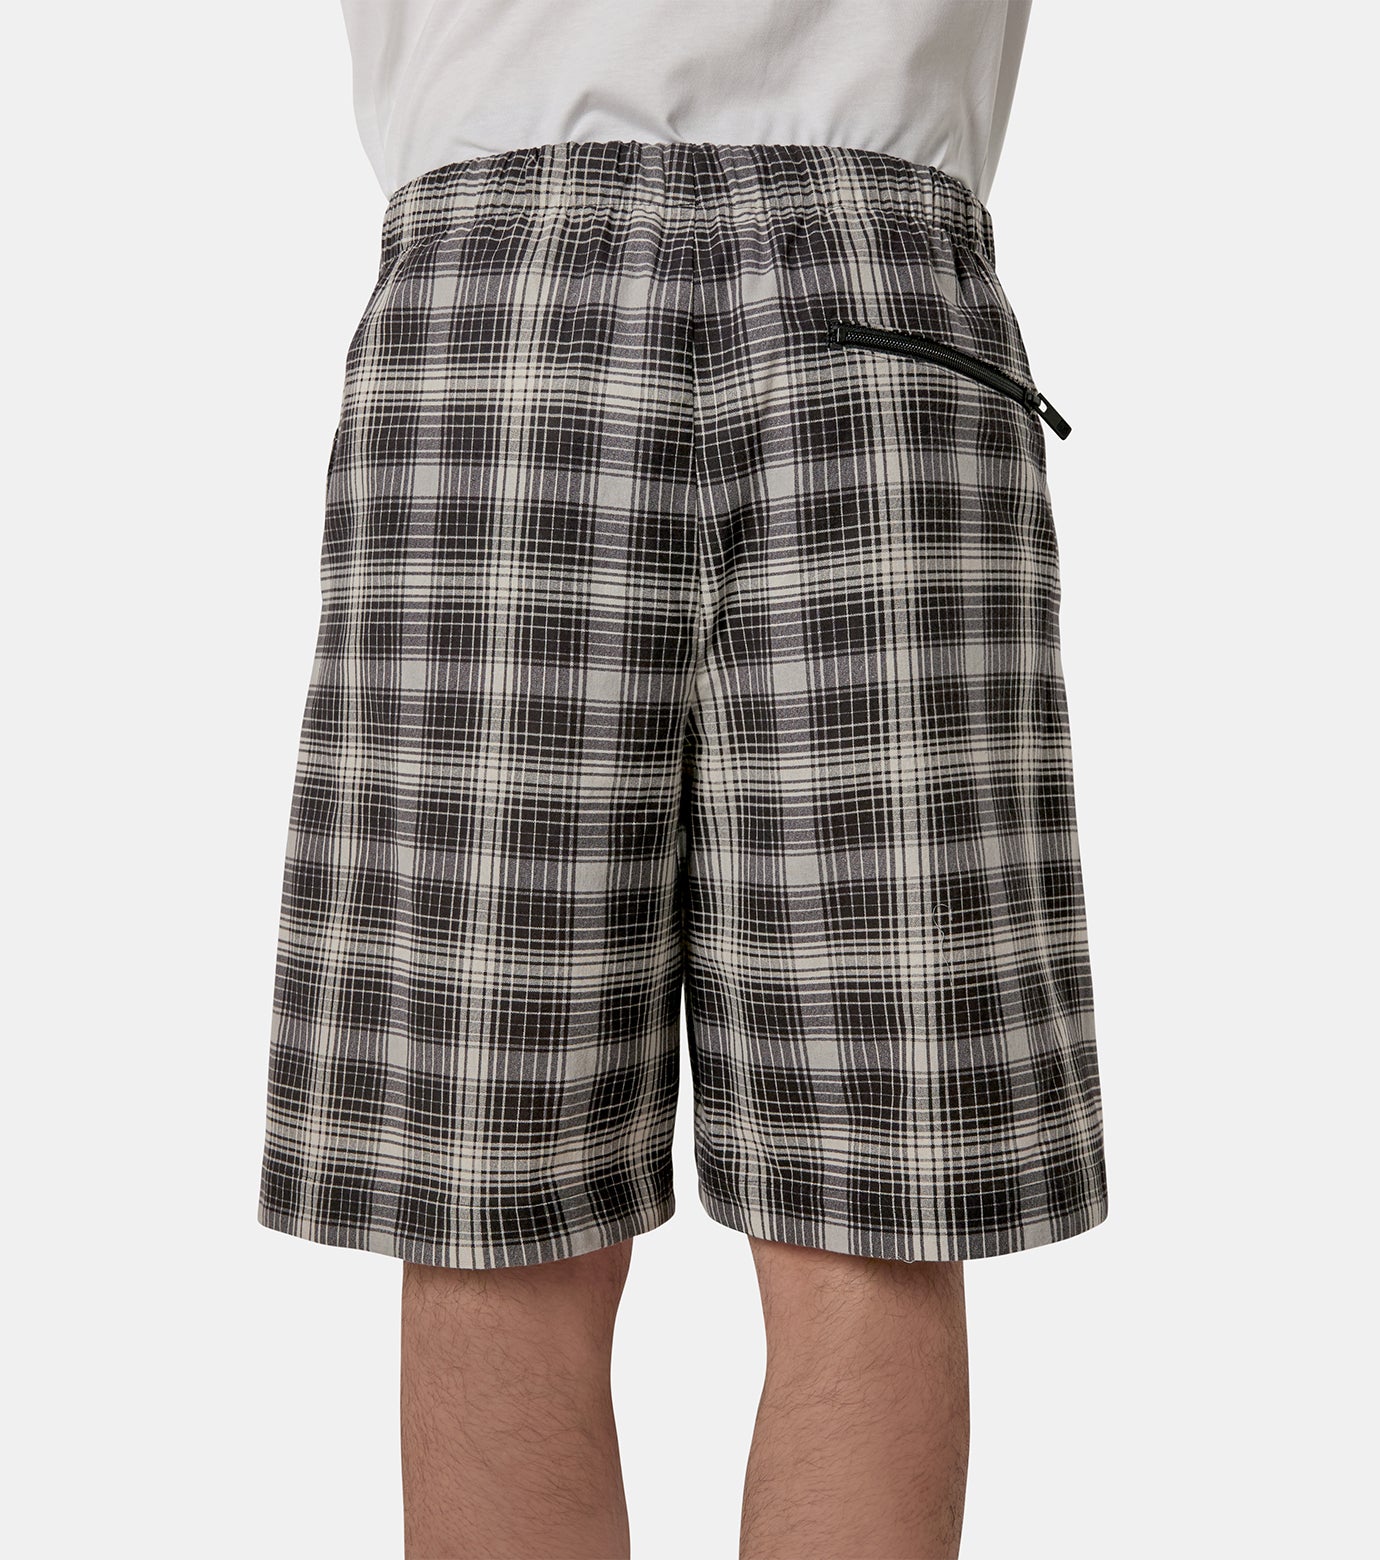 COMPILE CHECKED SHORTS